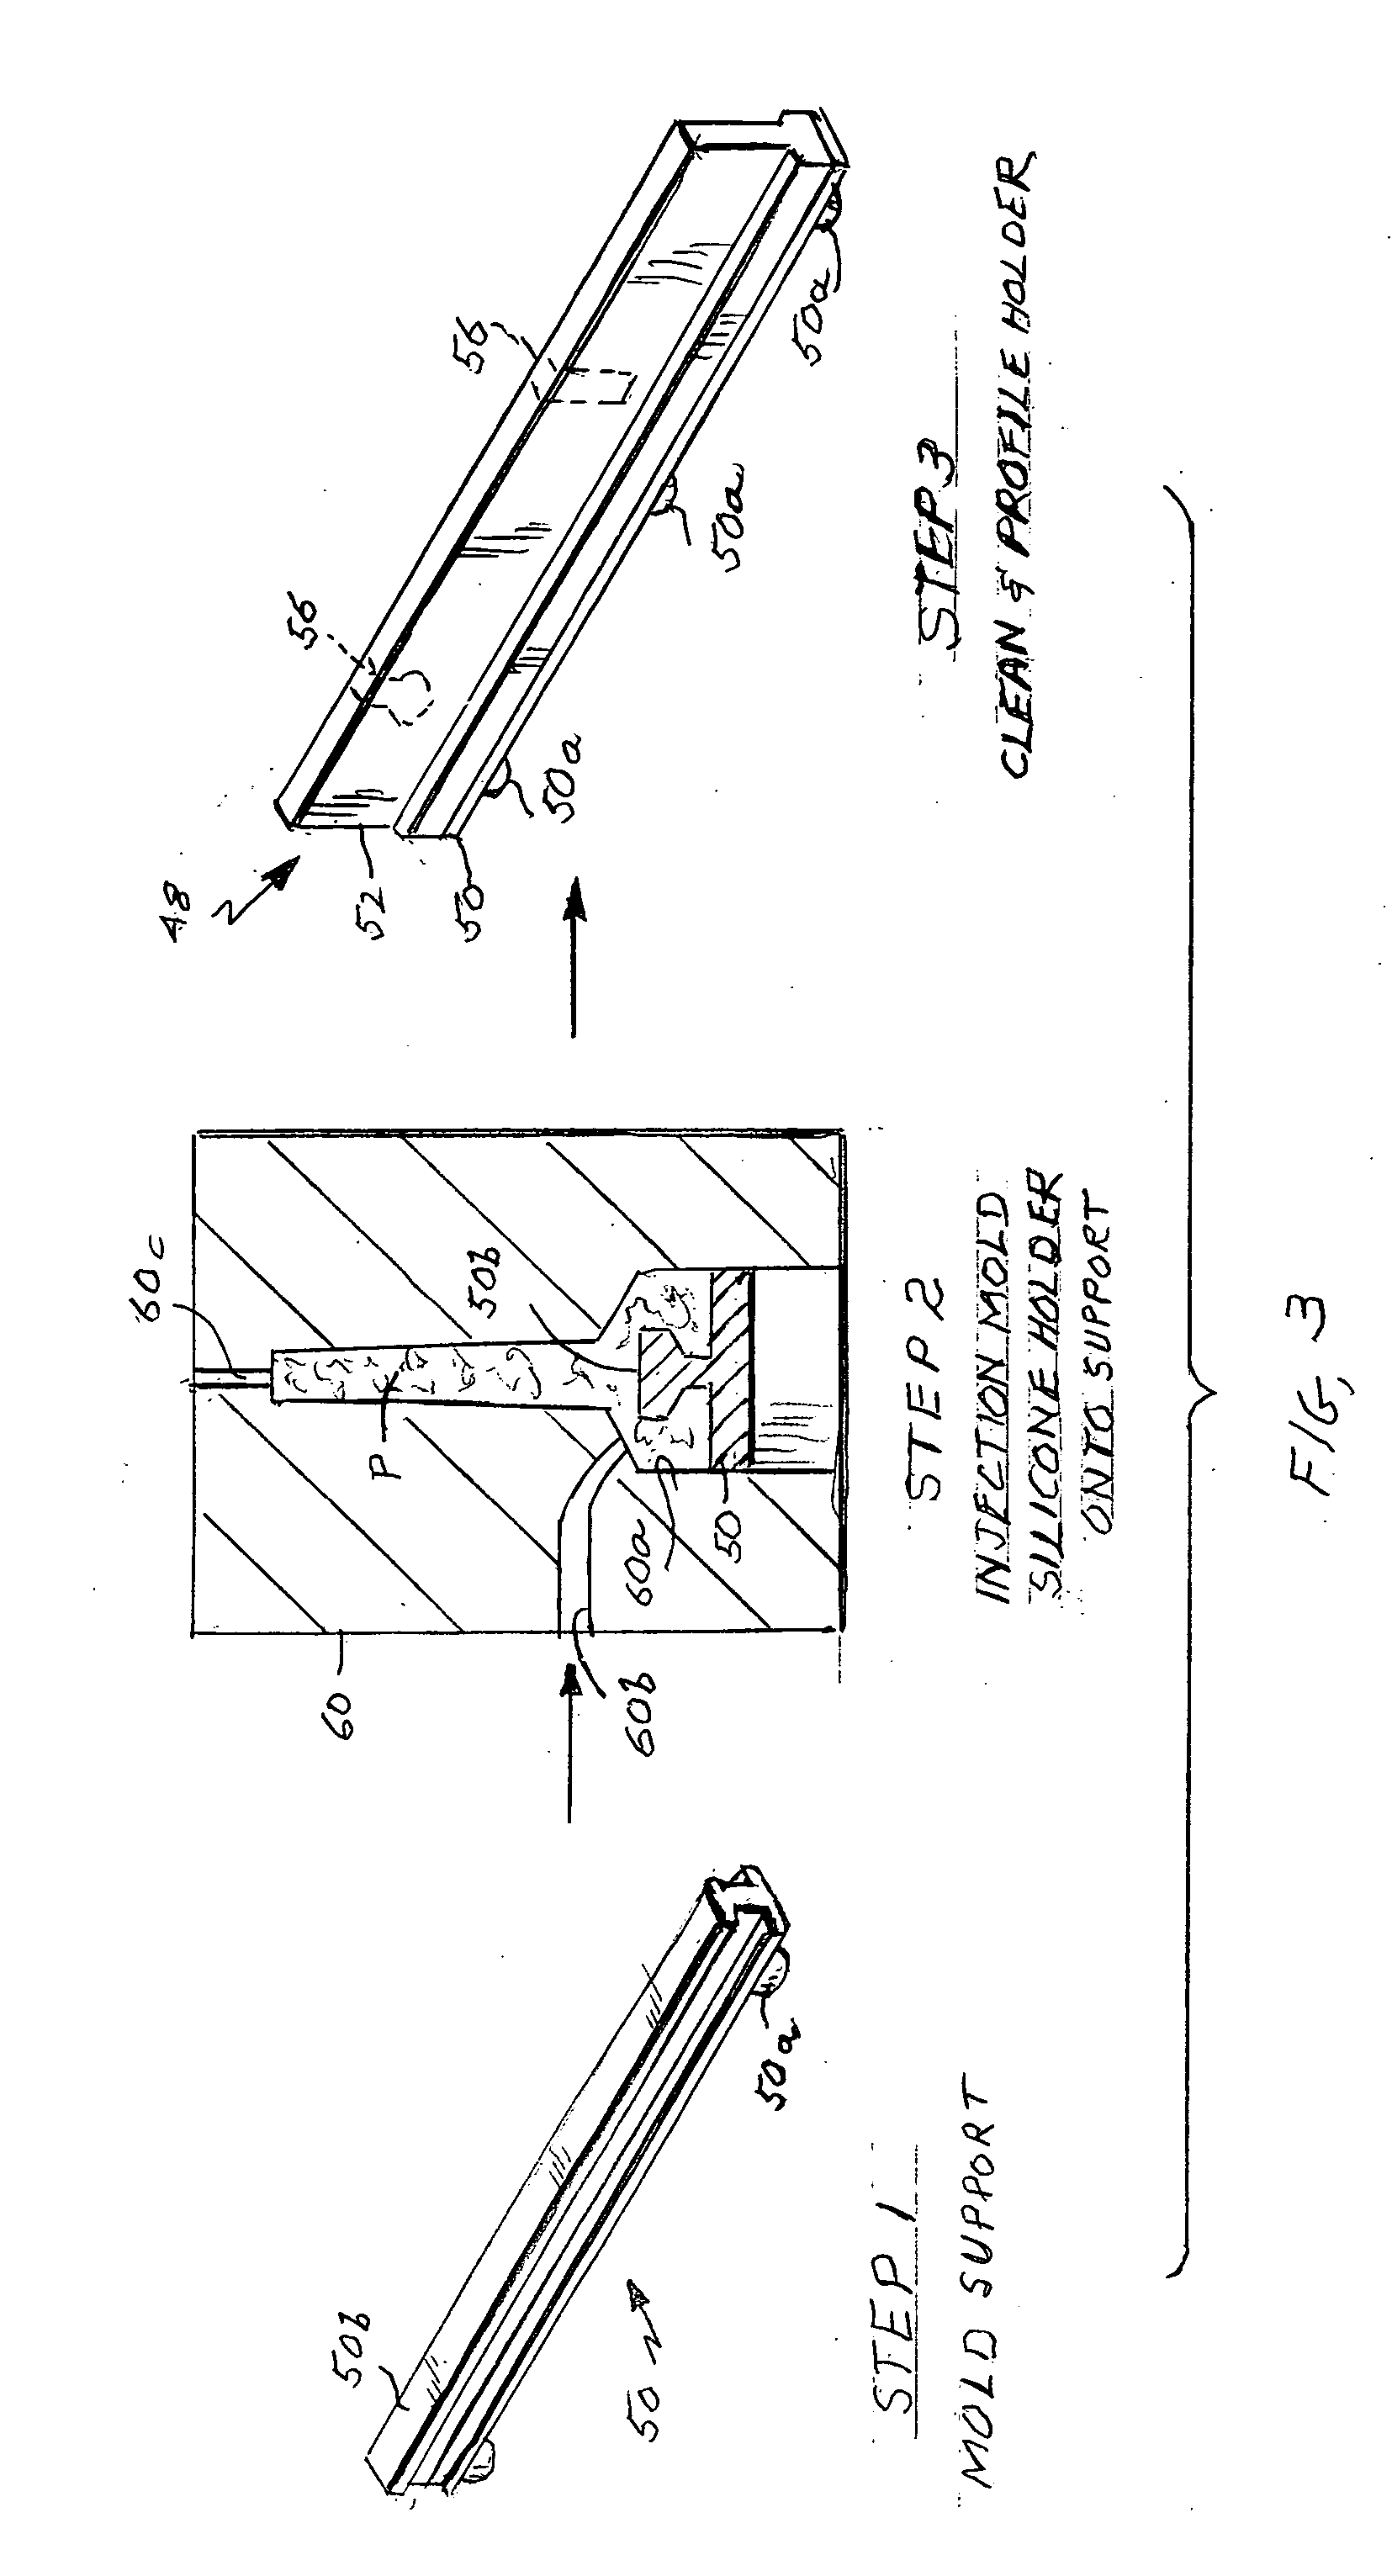 Medical instrument retainer assembly and method of making the retainer